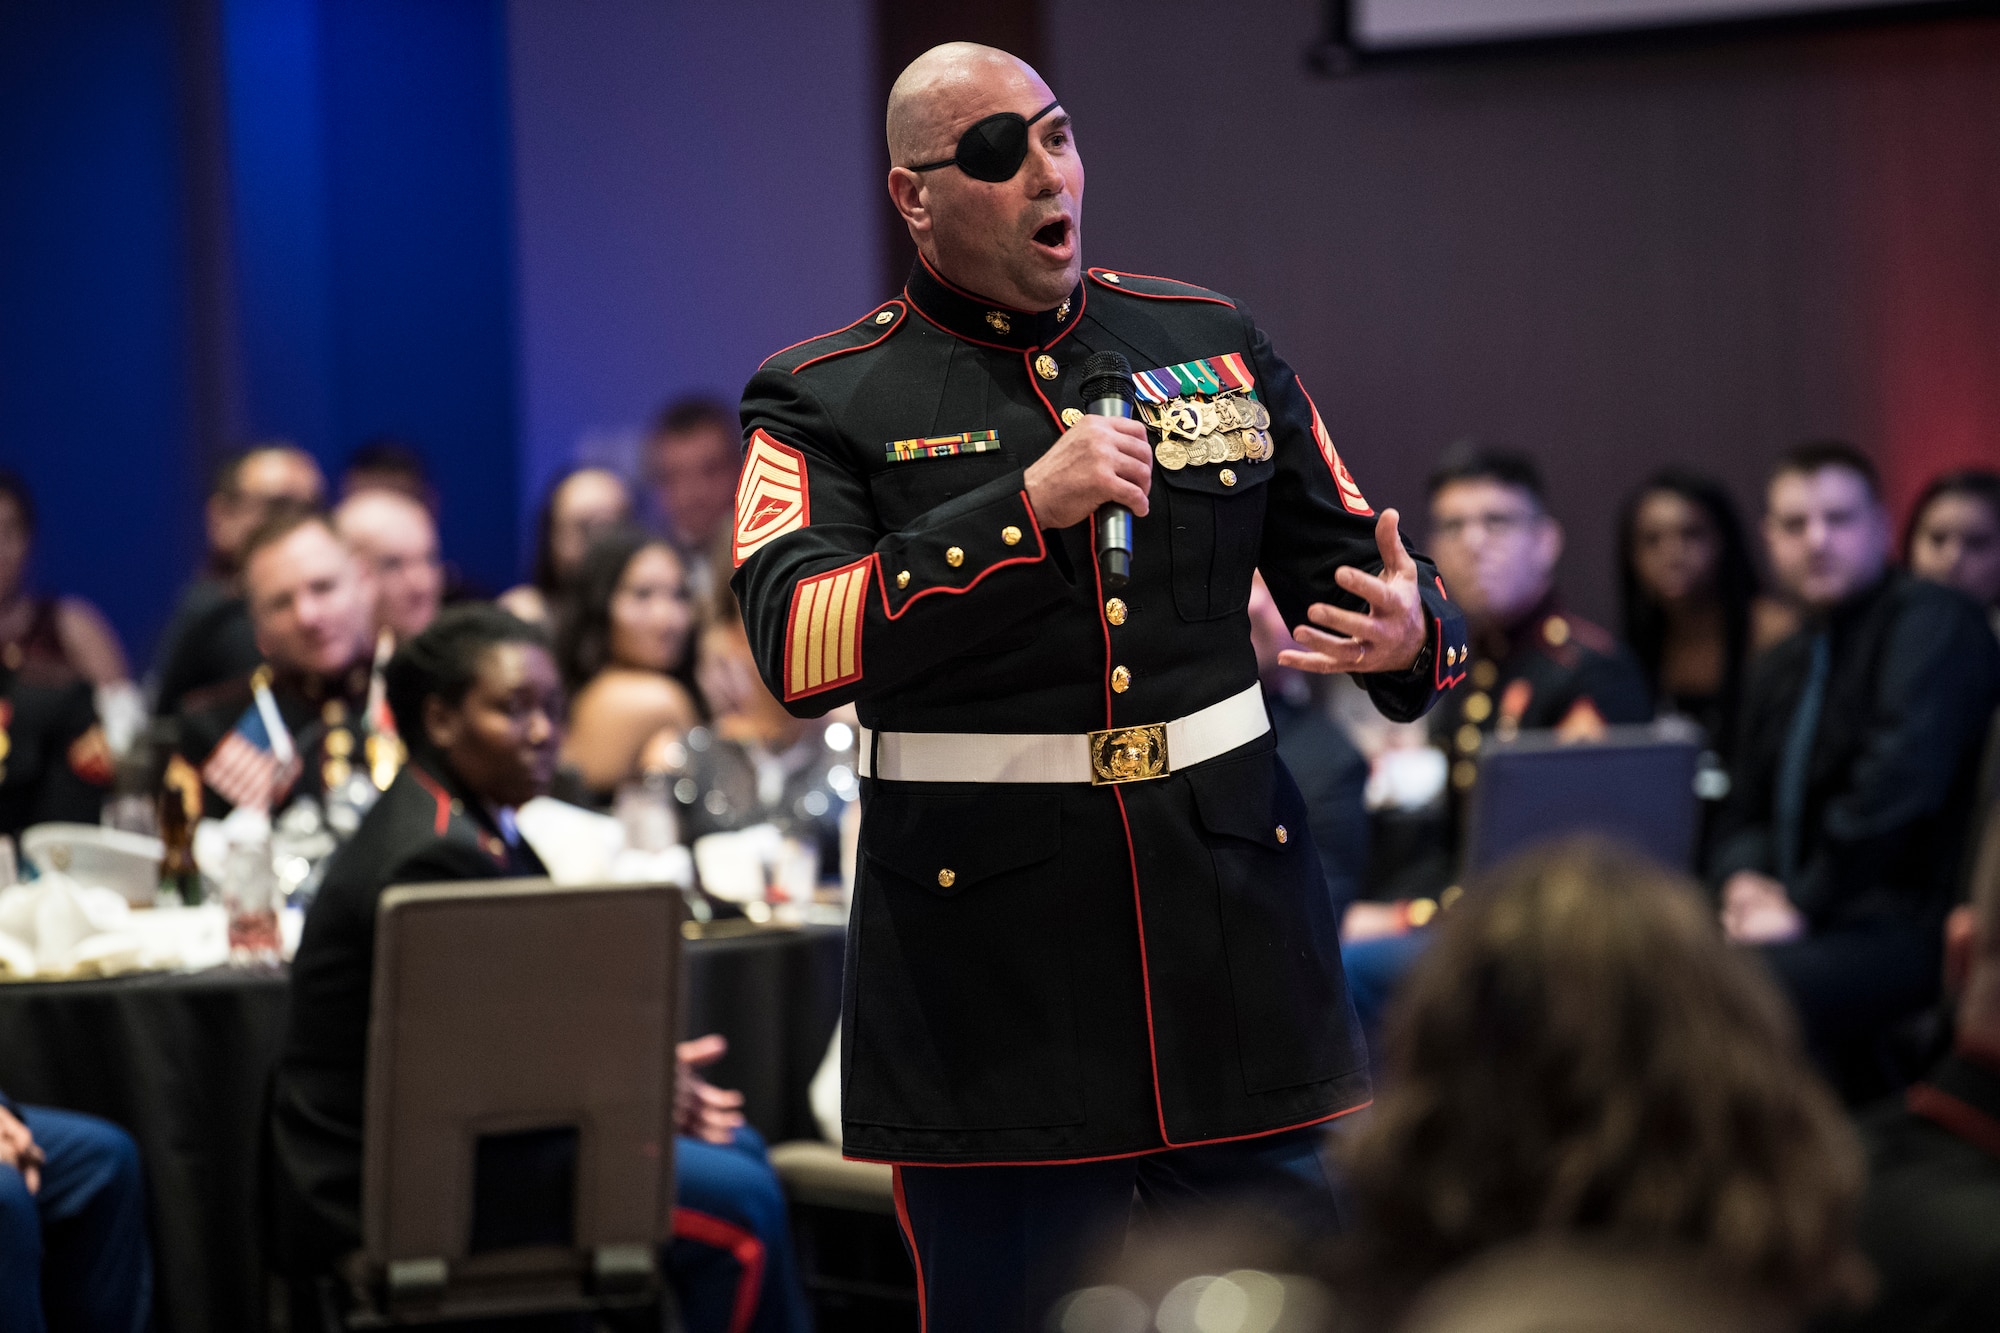 Retired Gunnery Sgt. Nick Popaditch delivers a speech at the Marine Corps Ball in Indianapolis, Ind., Nov. 17, 2018. Popaditch gained fame as the "Cigar Marine" for a photo of him taken as his unit toppled the statue of Saddam Hussein in Baghdad, and has published multiple books about the Marine Corps. (U.S. Air Force photo / Senior Airman Harrison Withrow)